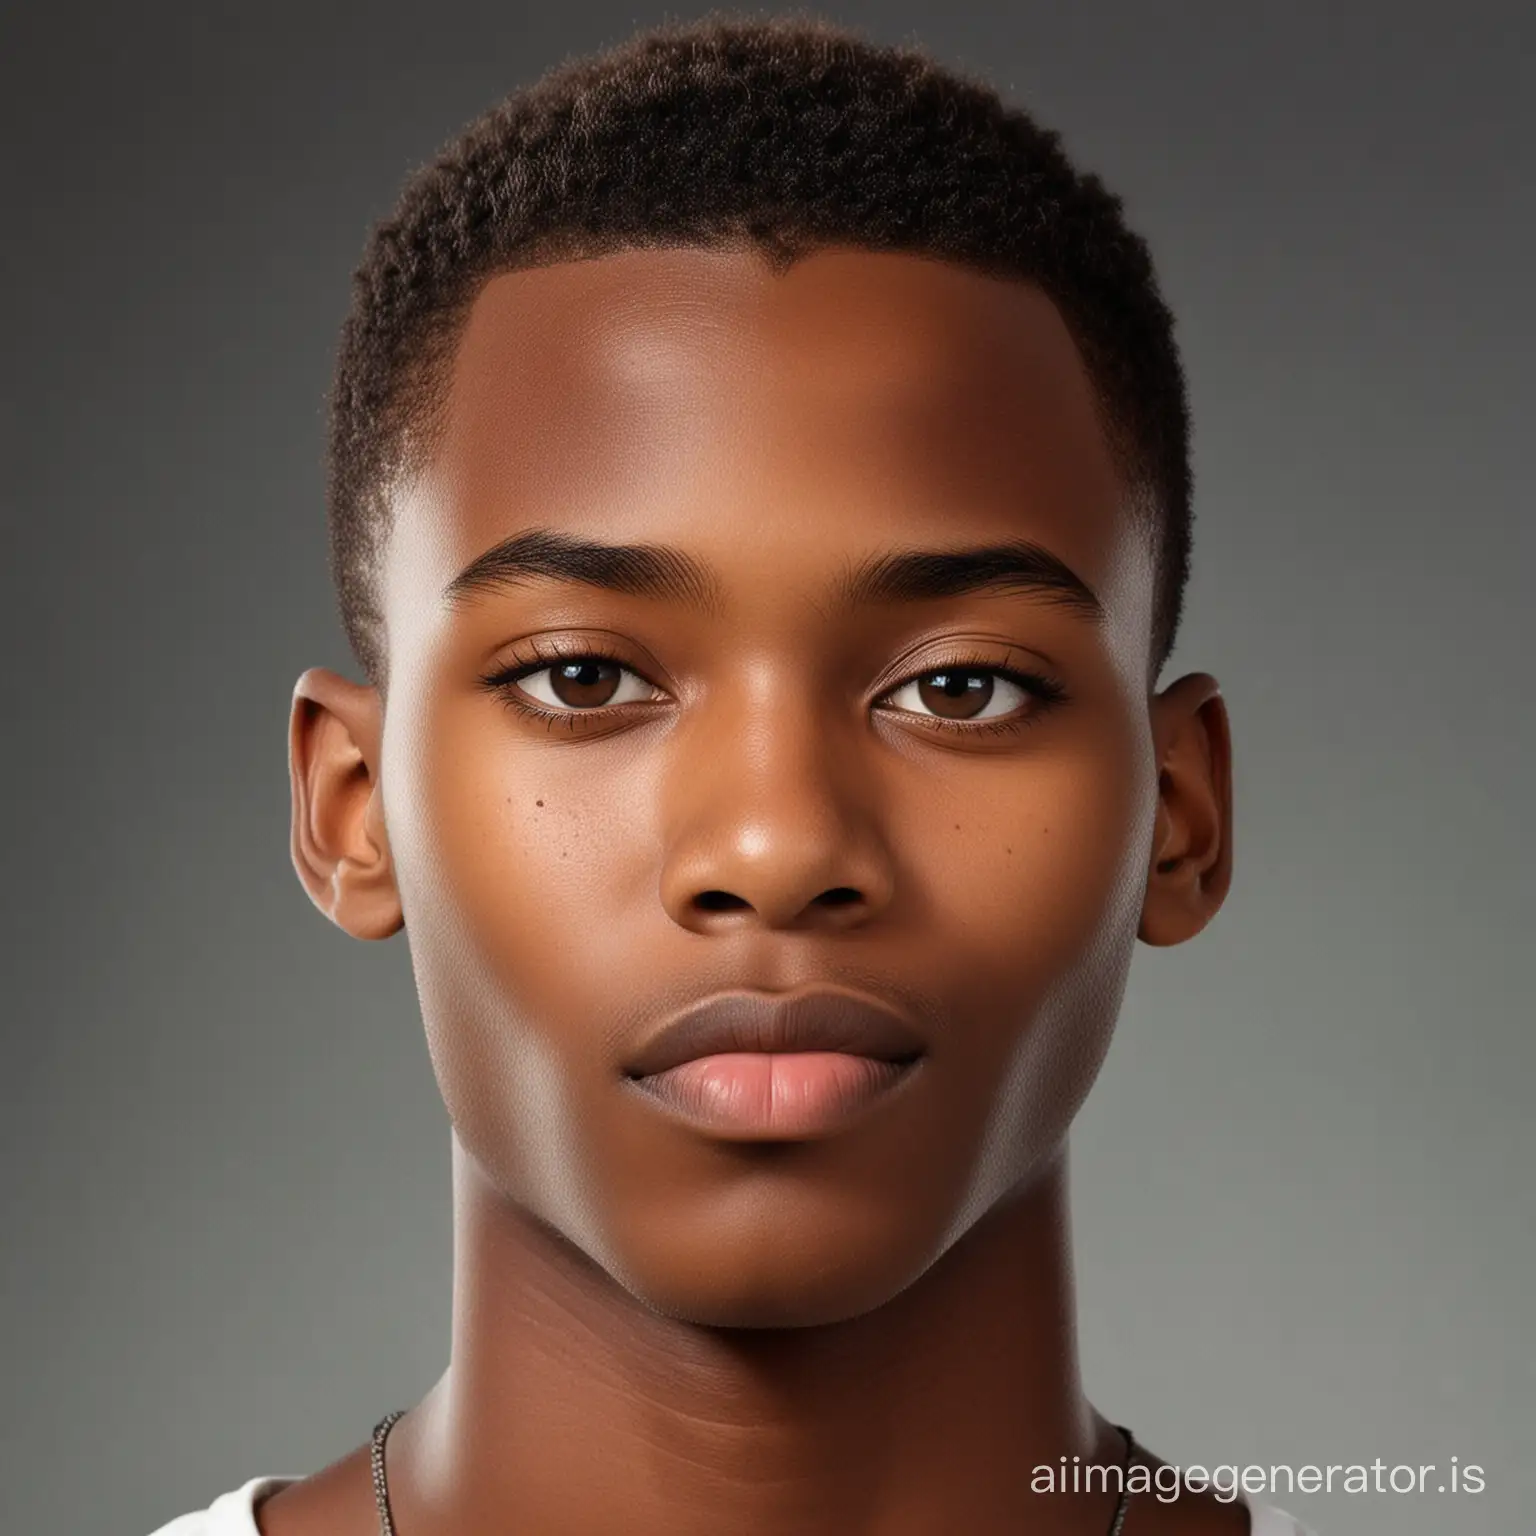 Generate an image of a handsome West African young teenager with a short cat hair, almond shaped eyes, a well structured face, and a nose perfectly proportioned to his face.